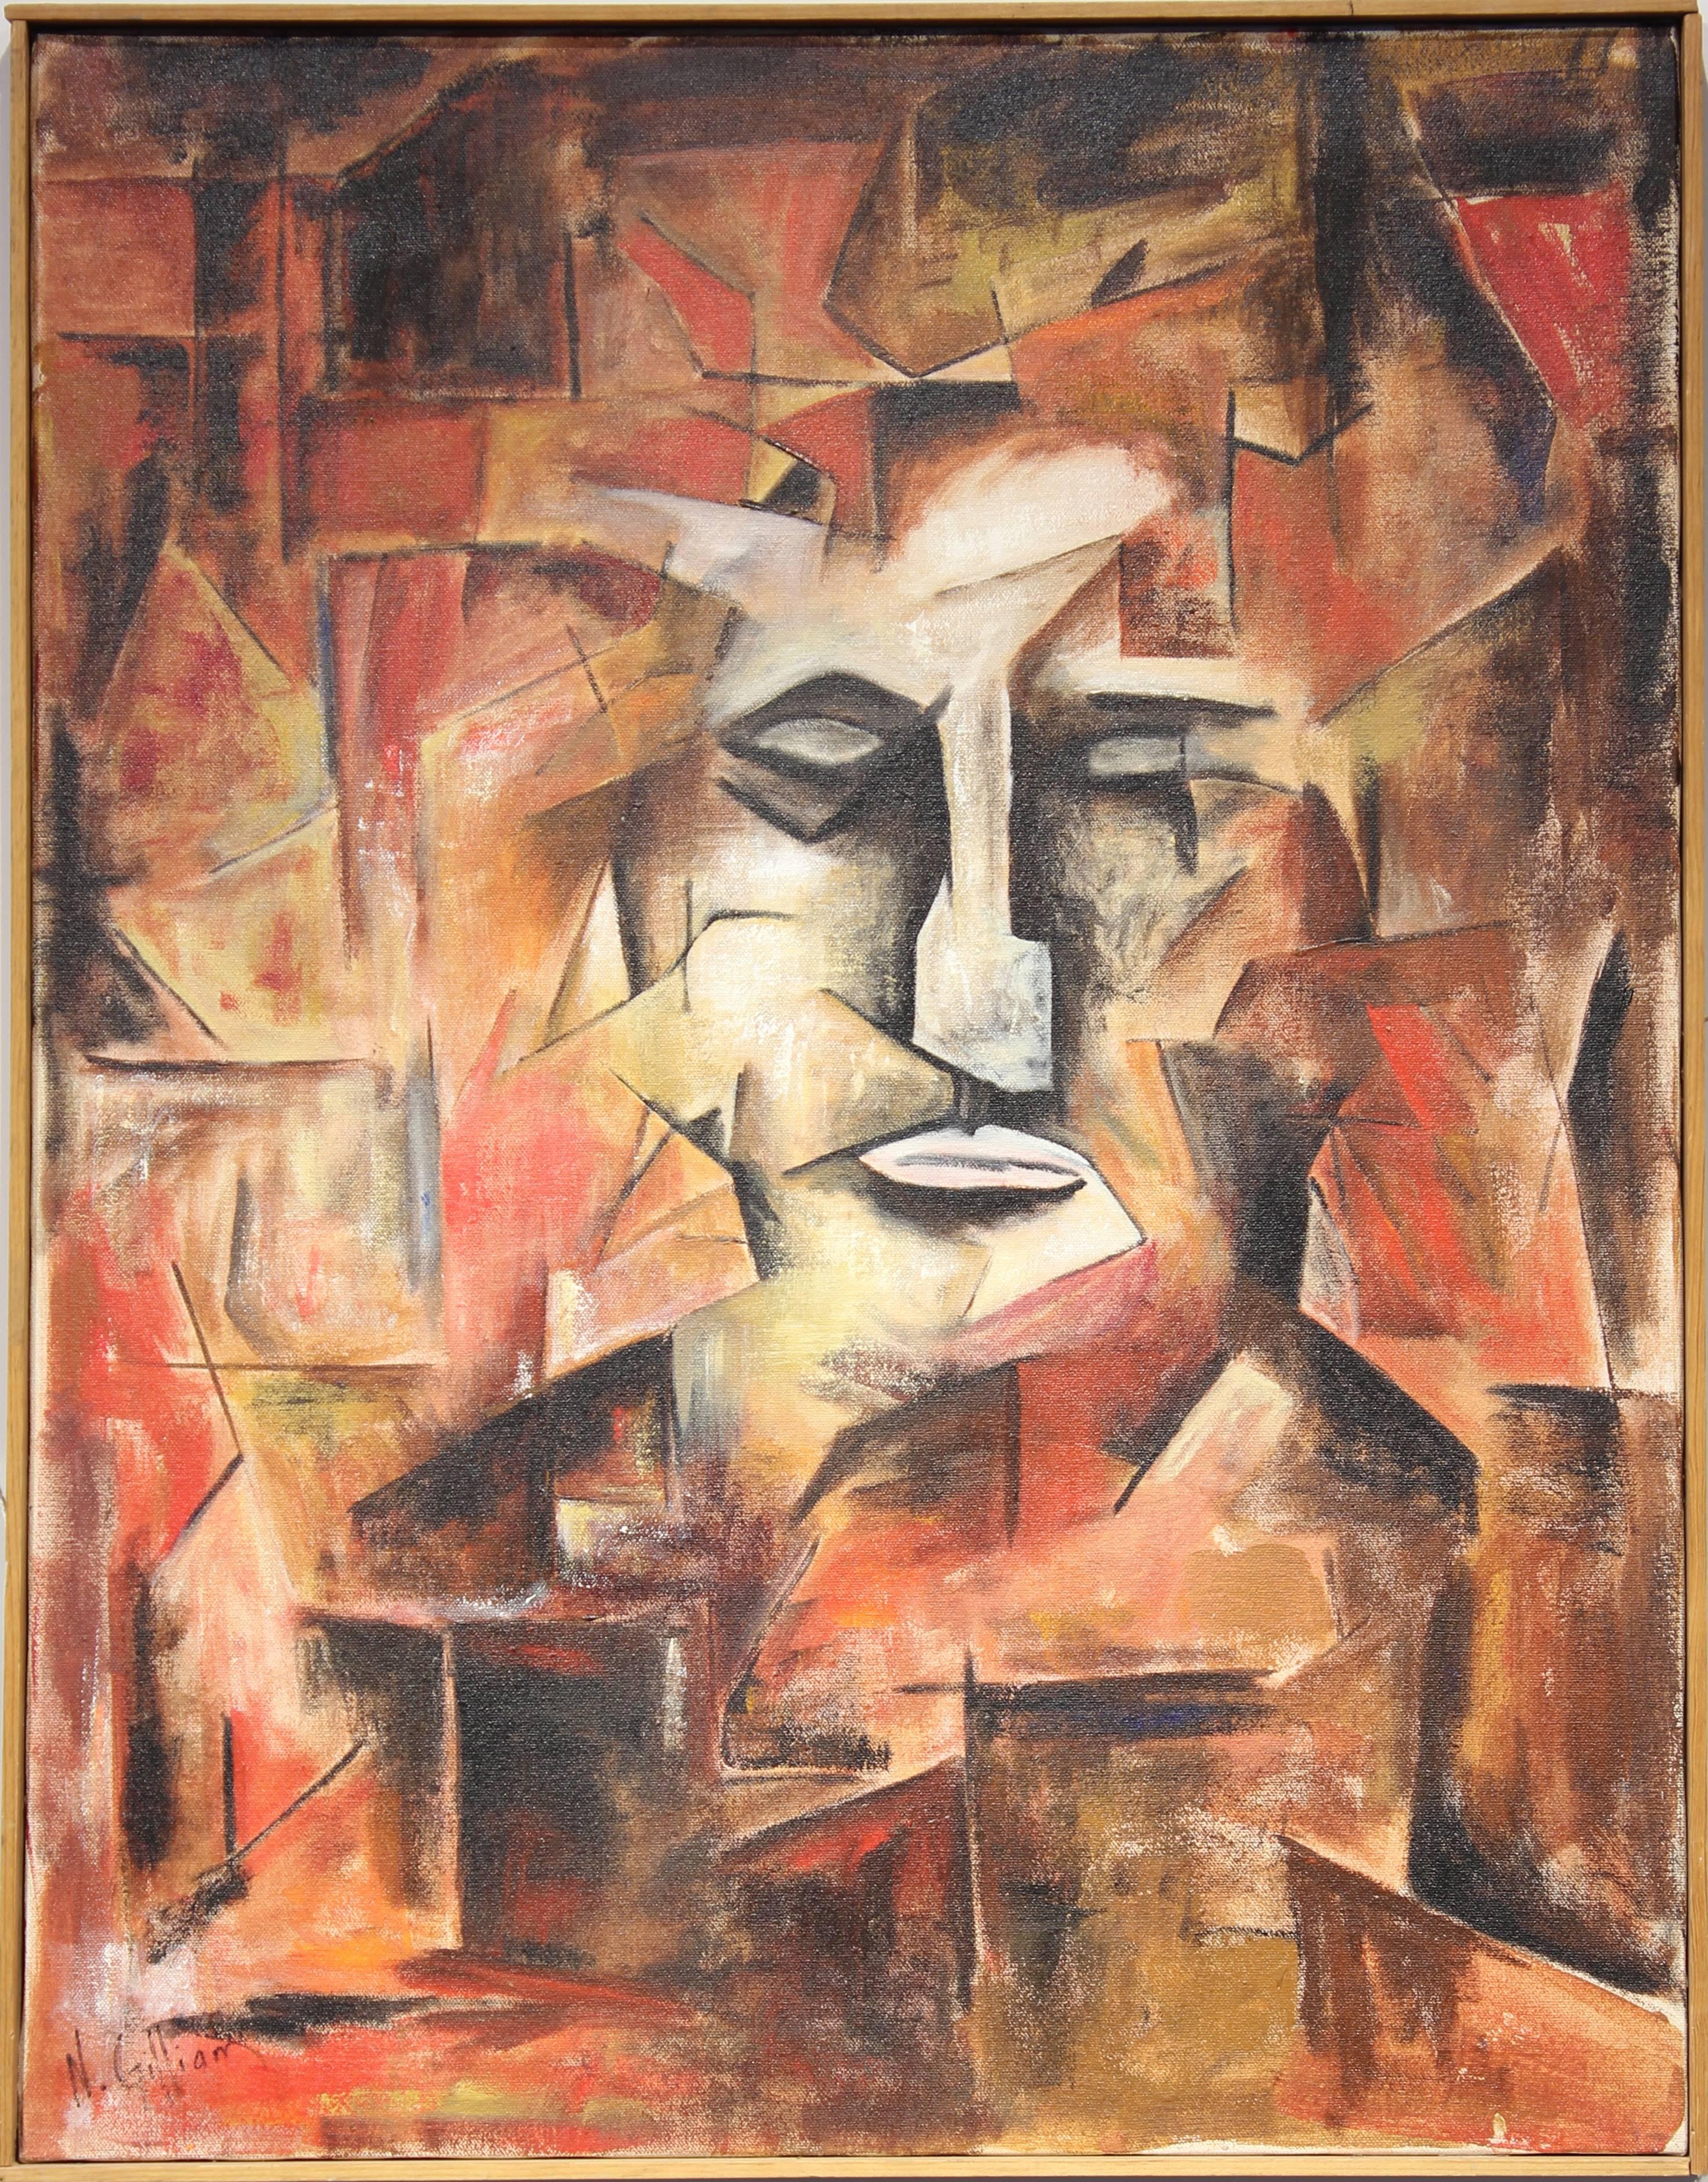 Nelda Gilliam Abstract Painting - Red, White and Black Cubist Portrait